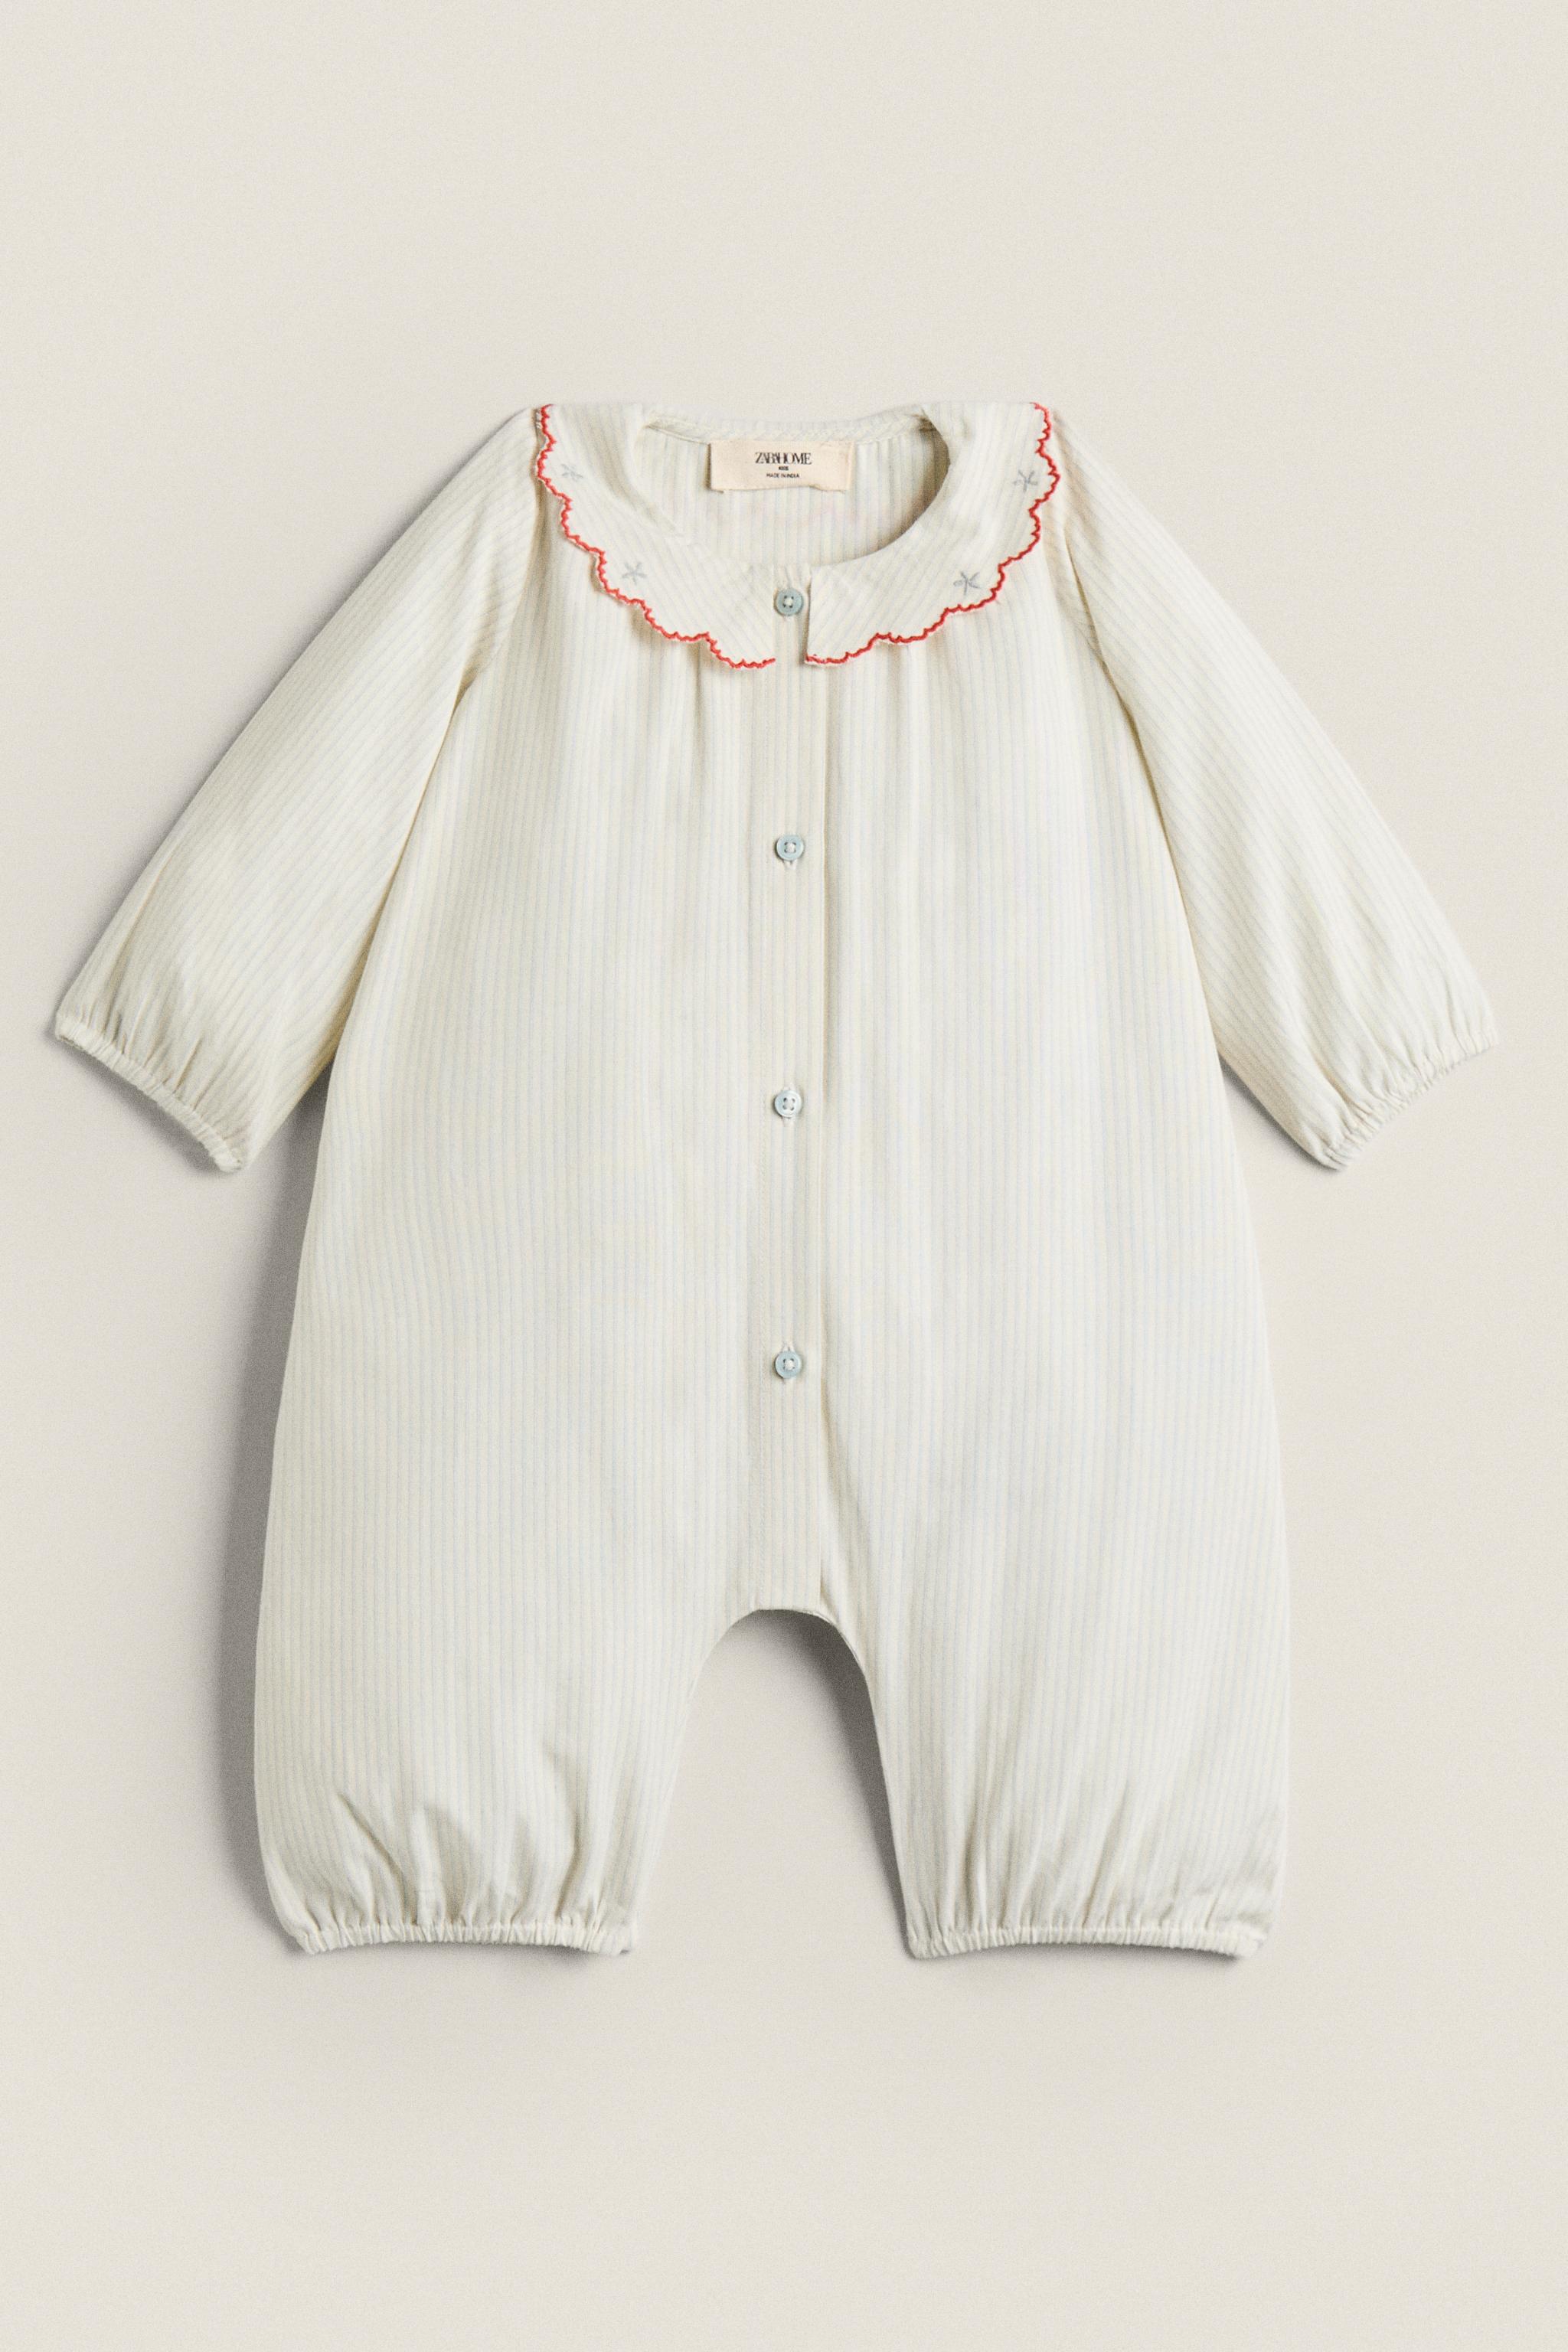 CHILDREN'S BODYSUIT WITH EMBROIDERED FLORAL COLLAR 